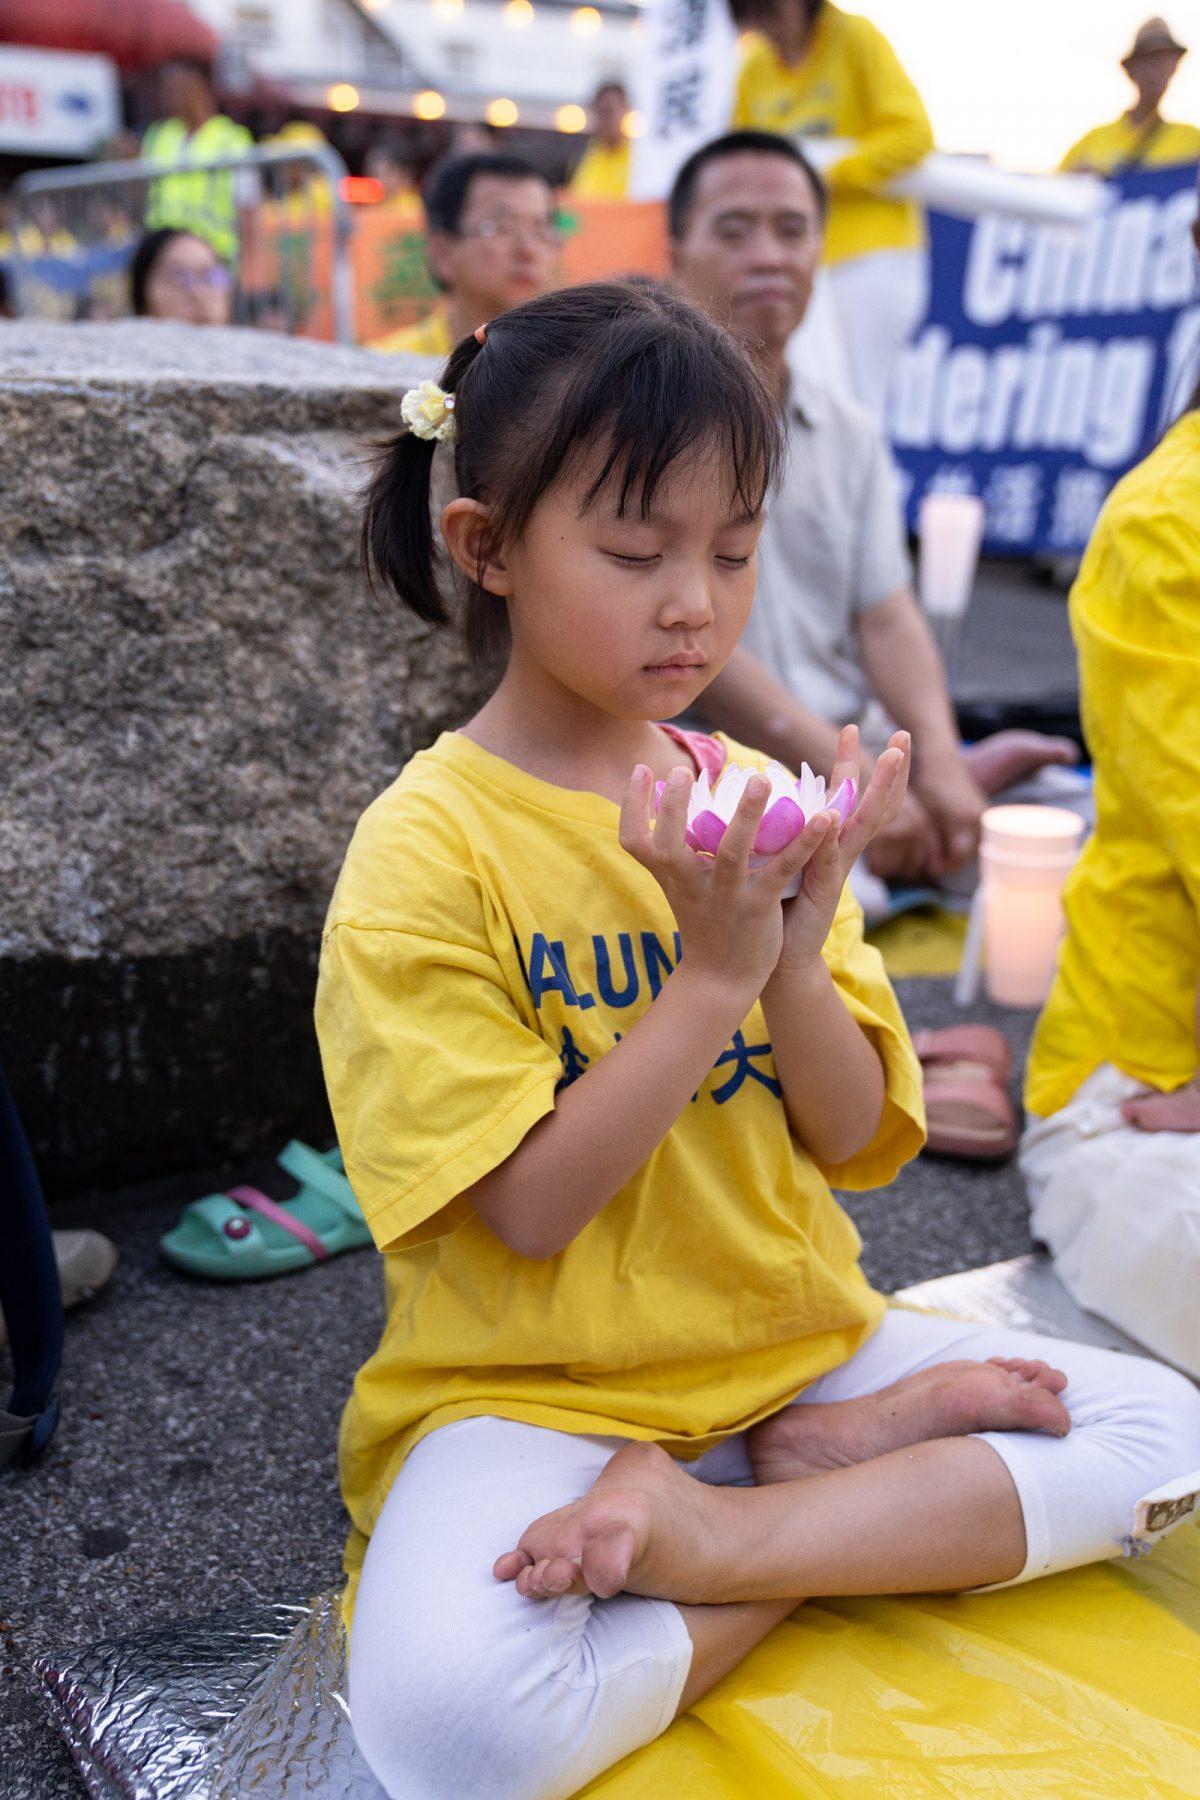 A girl sits at the vigil commemorating the 20th anniversary of the persecution of Falun Gong in New York, N.Y., on July 15, 2019. (Larry Dye/The Epoch Times)